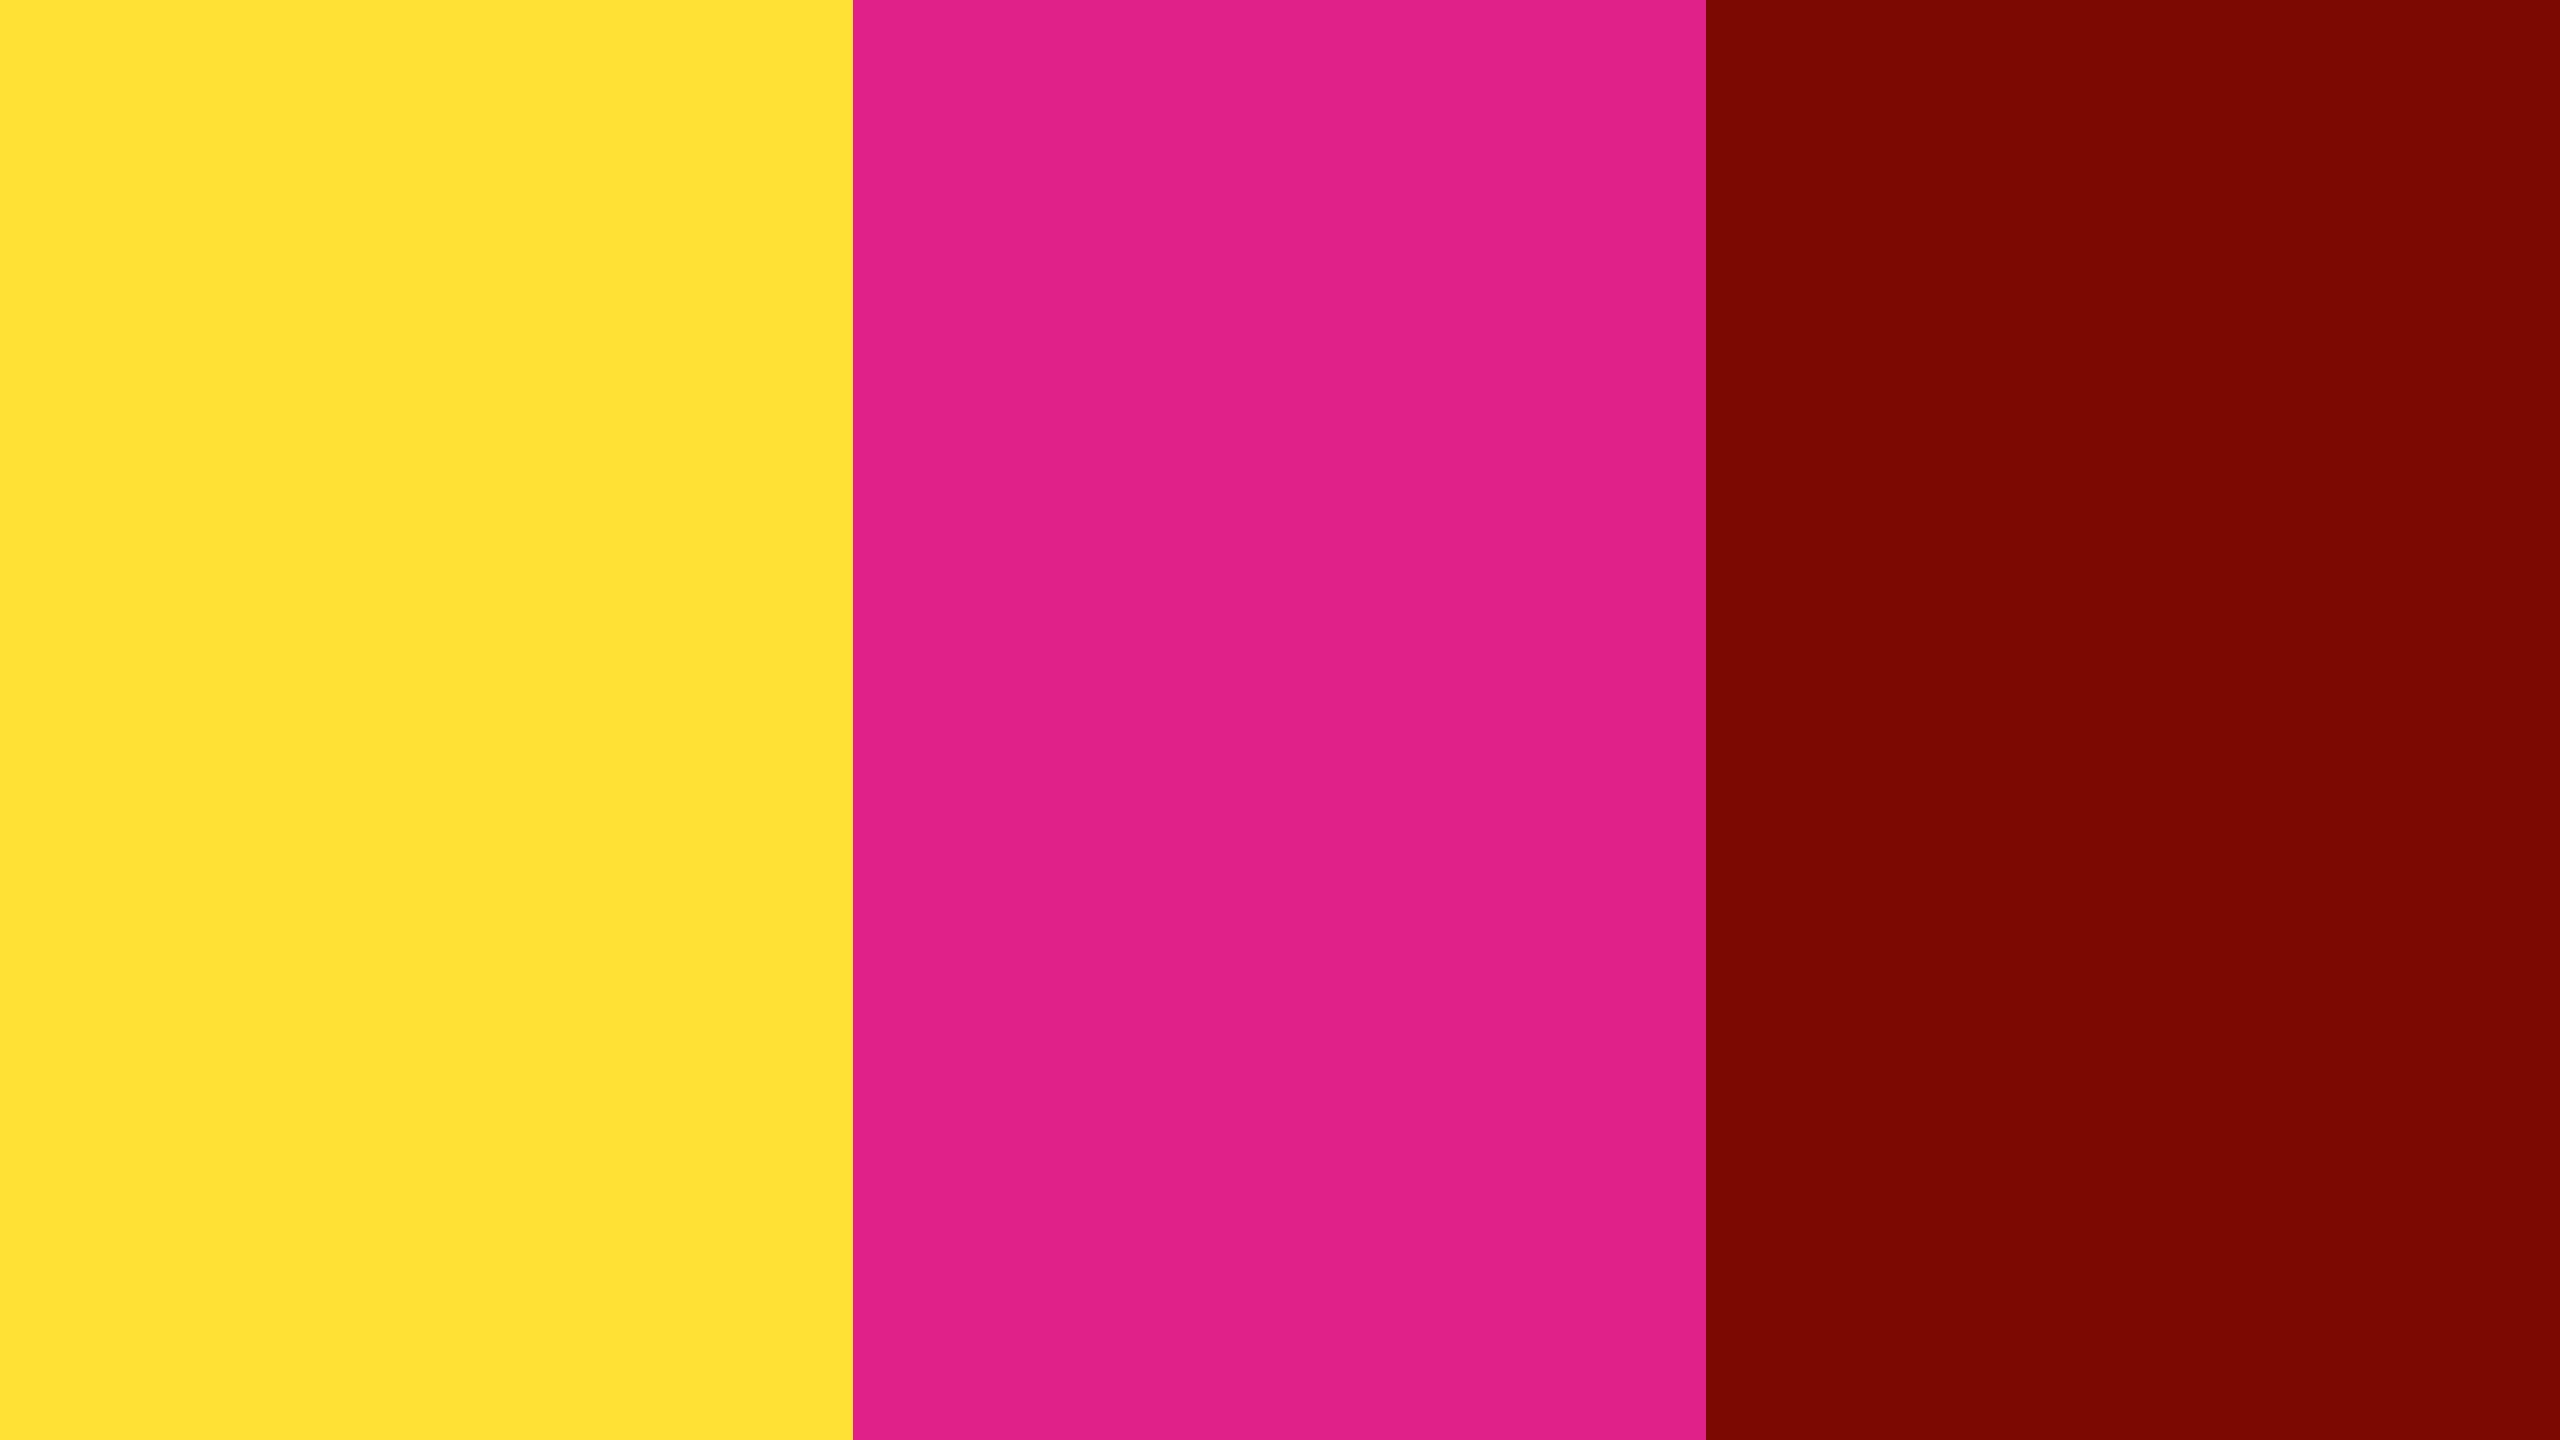 Banana Yellow Barbie Pink And Barn Red Solid Three Color Background